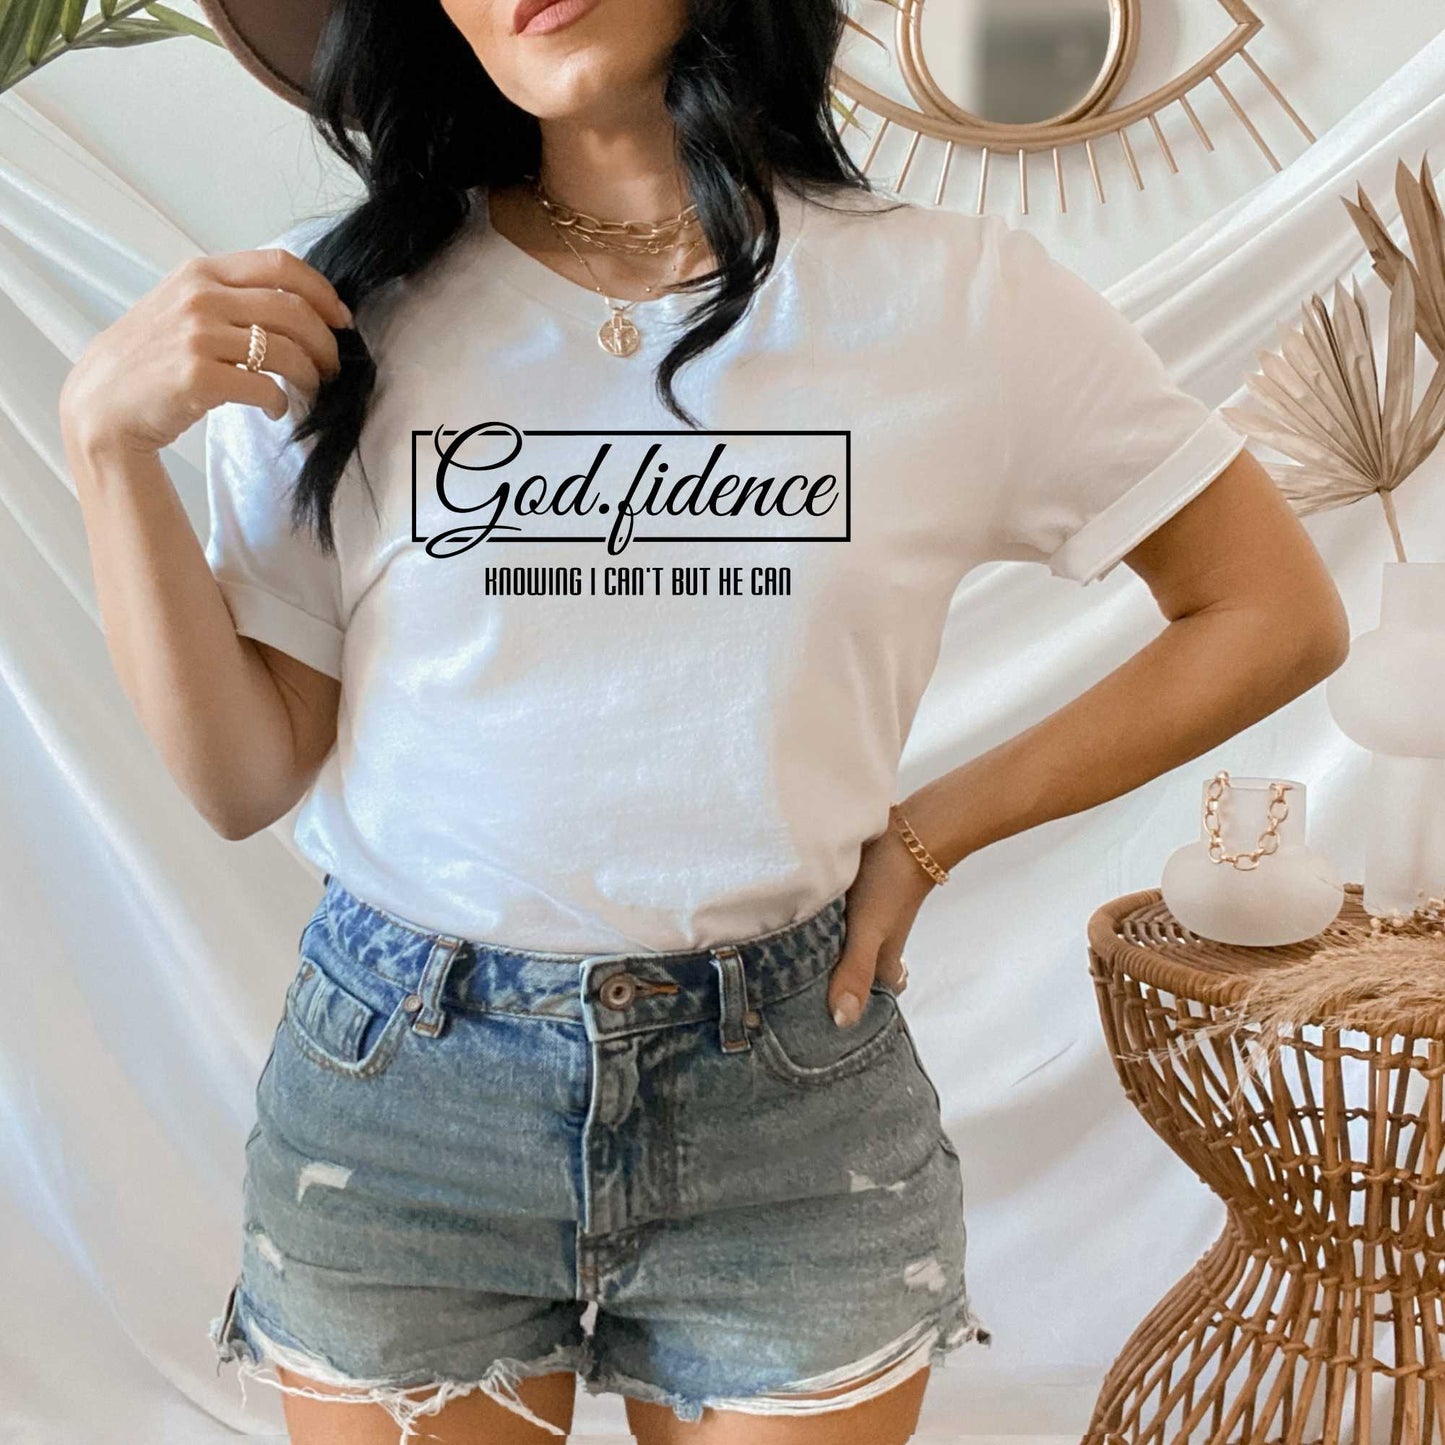 Godfidence, Knowing I Can't Be He Can, Christian Shirt for Women and Men